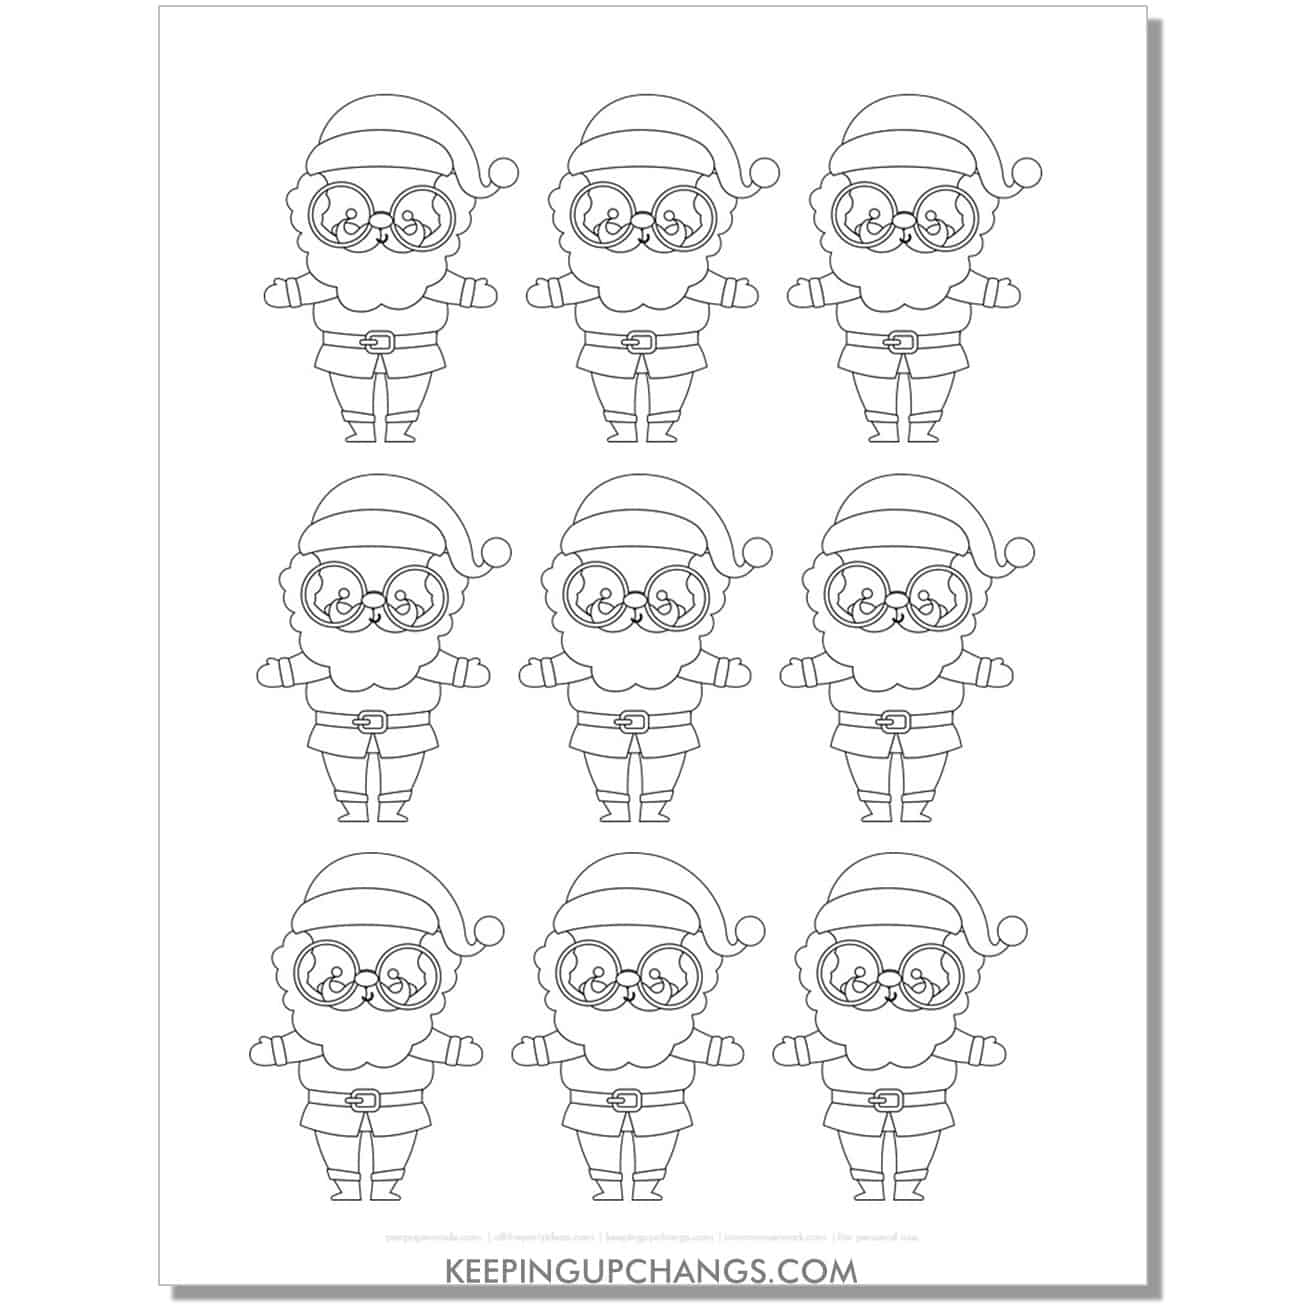 free mini, small glasses santa outline, cut out template in black and white.